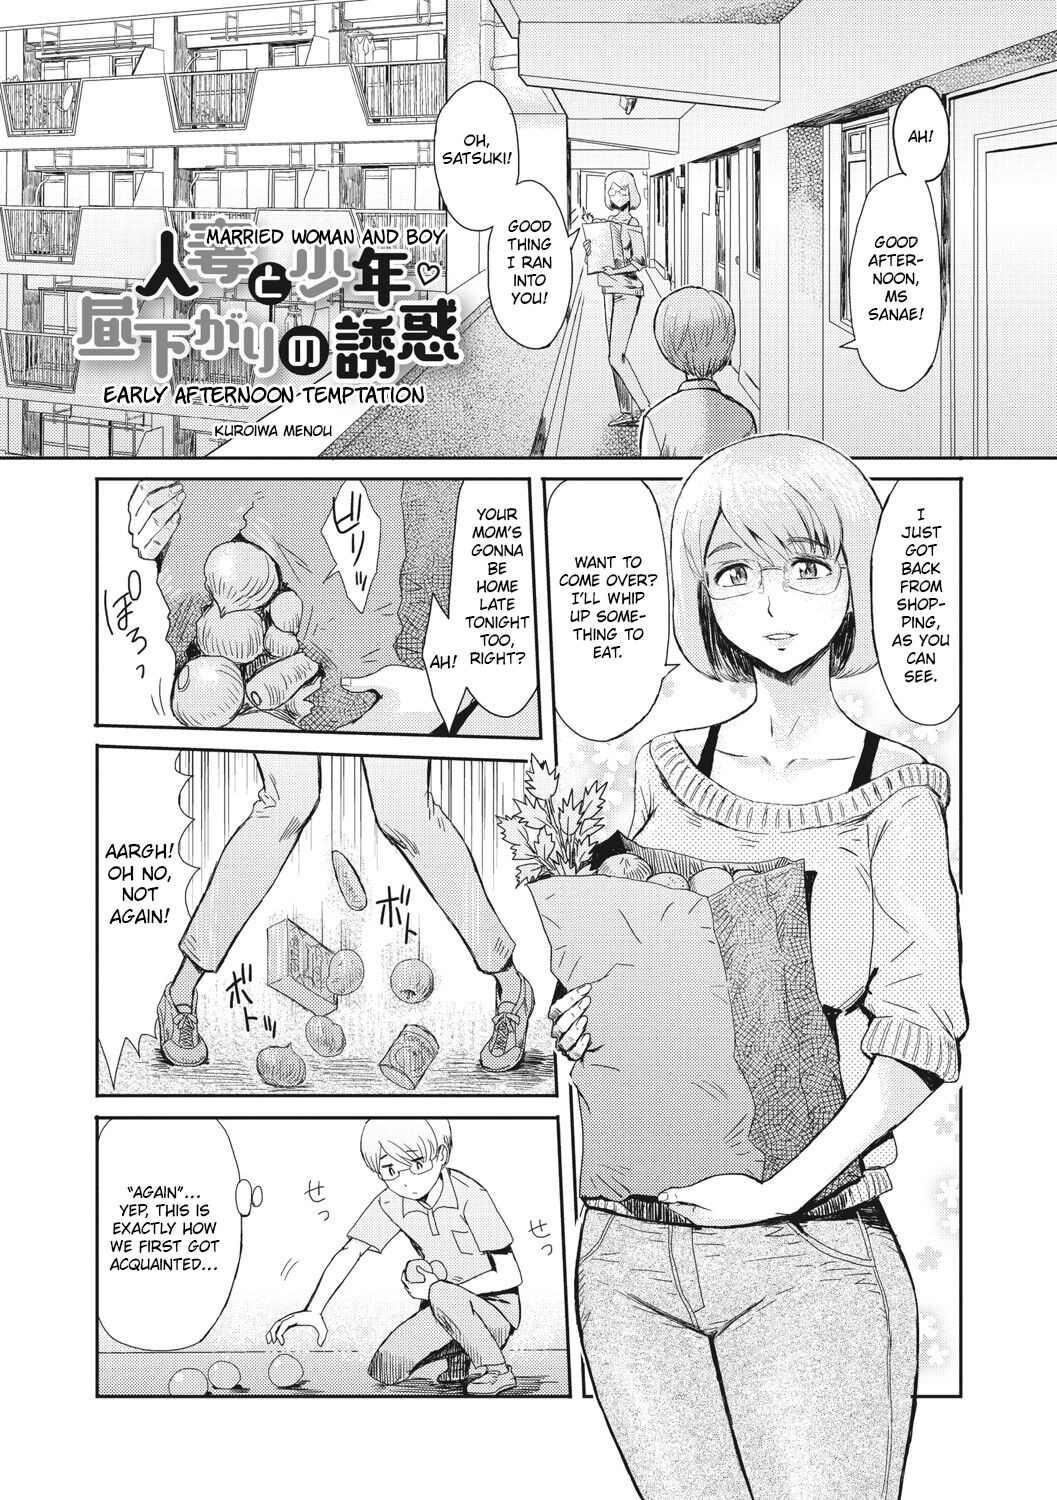 Married Woman and Boy Early Afternoon Temptation Kuroiwa Menou Porn Comic